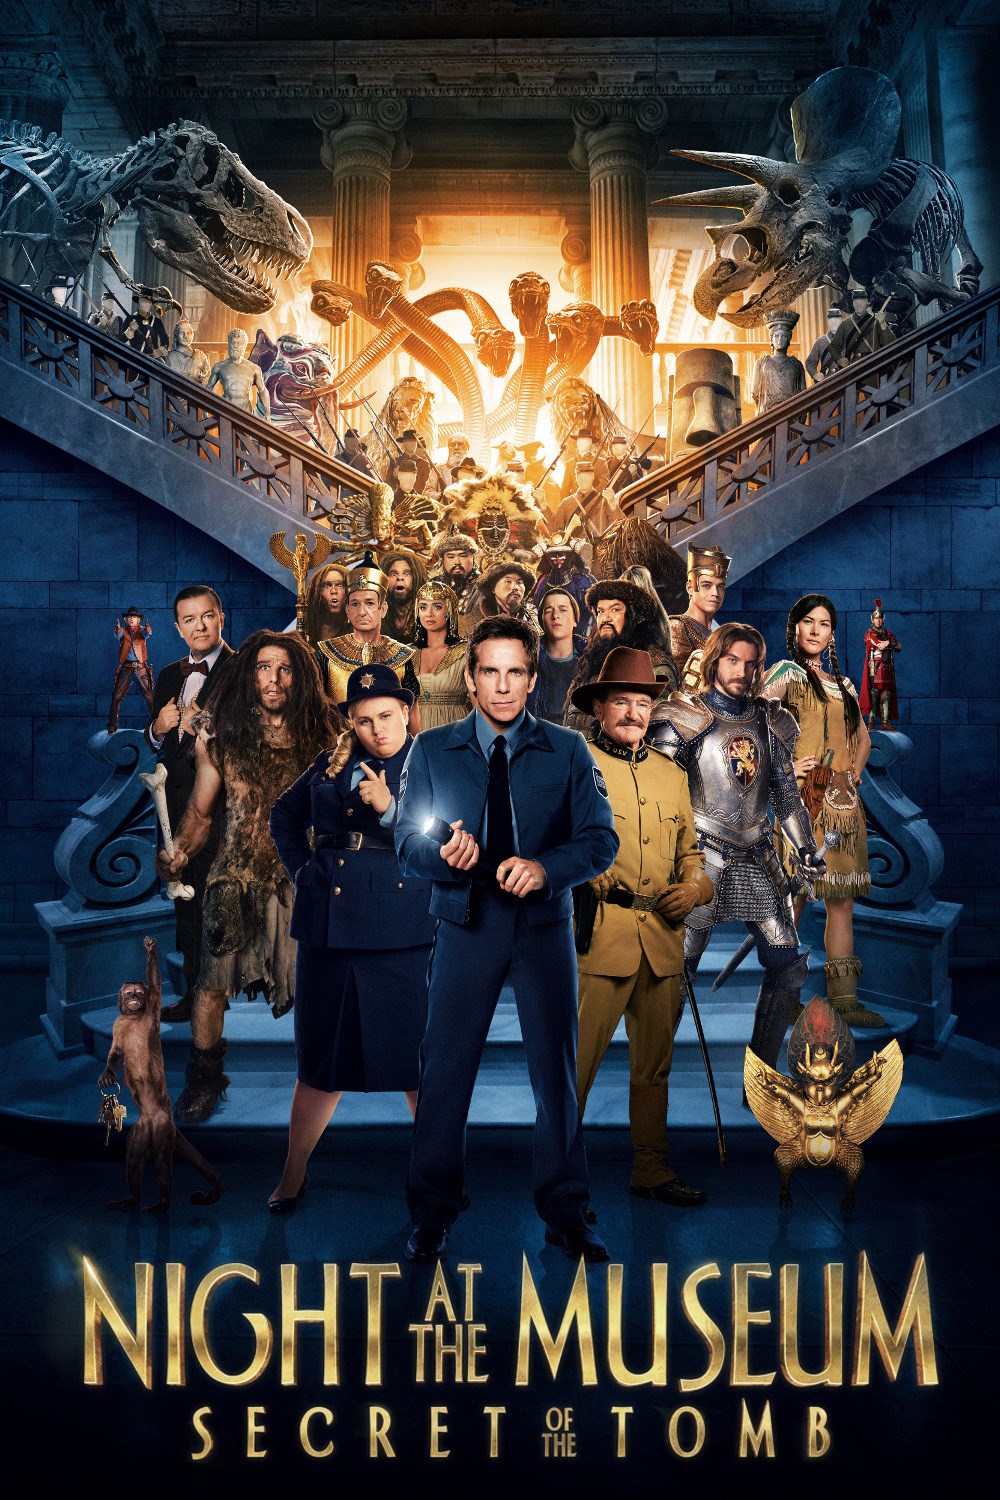 Night at the museum: secret of the Tomb - 2014